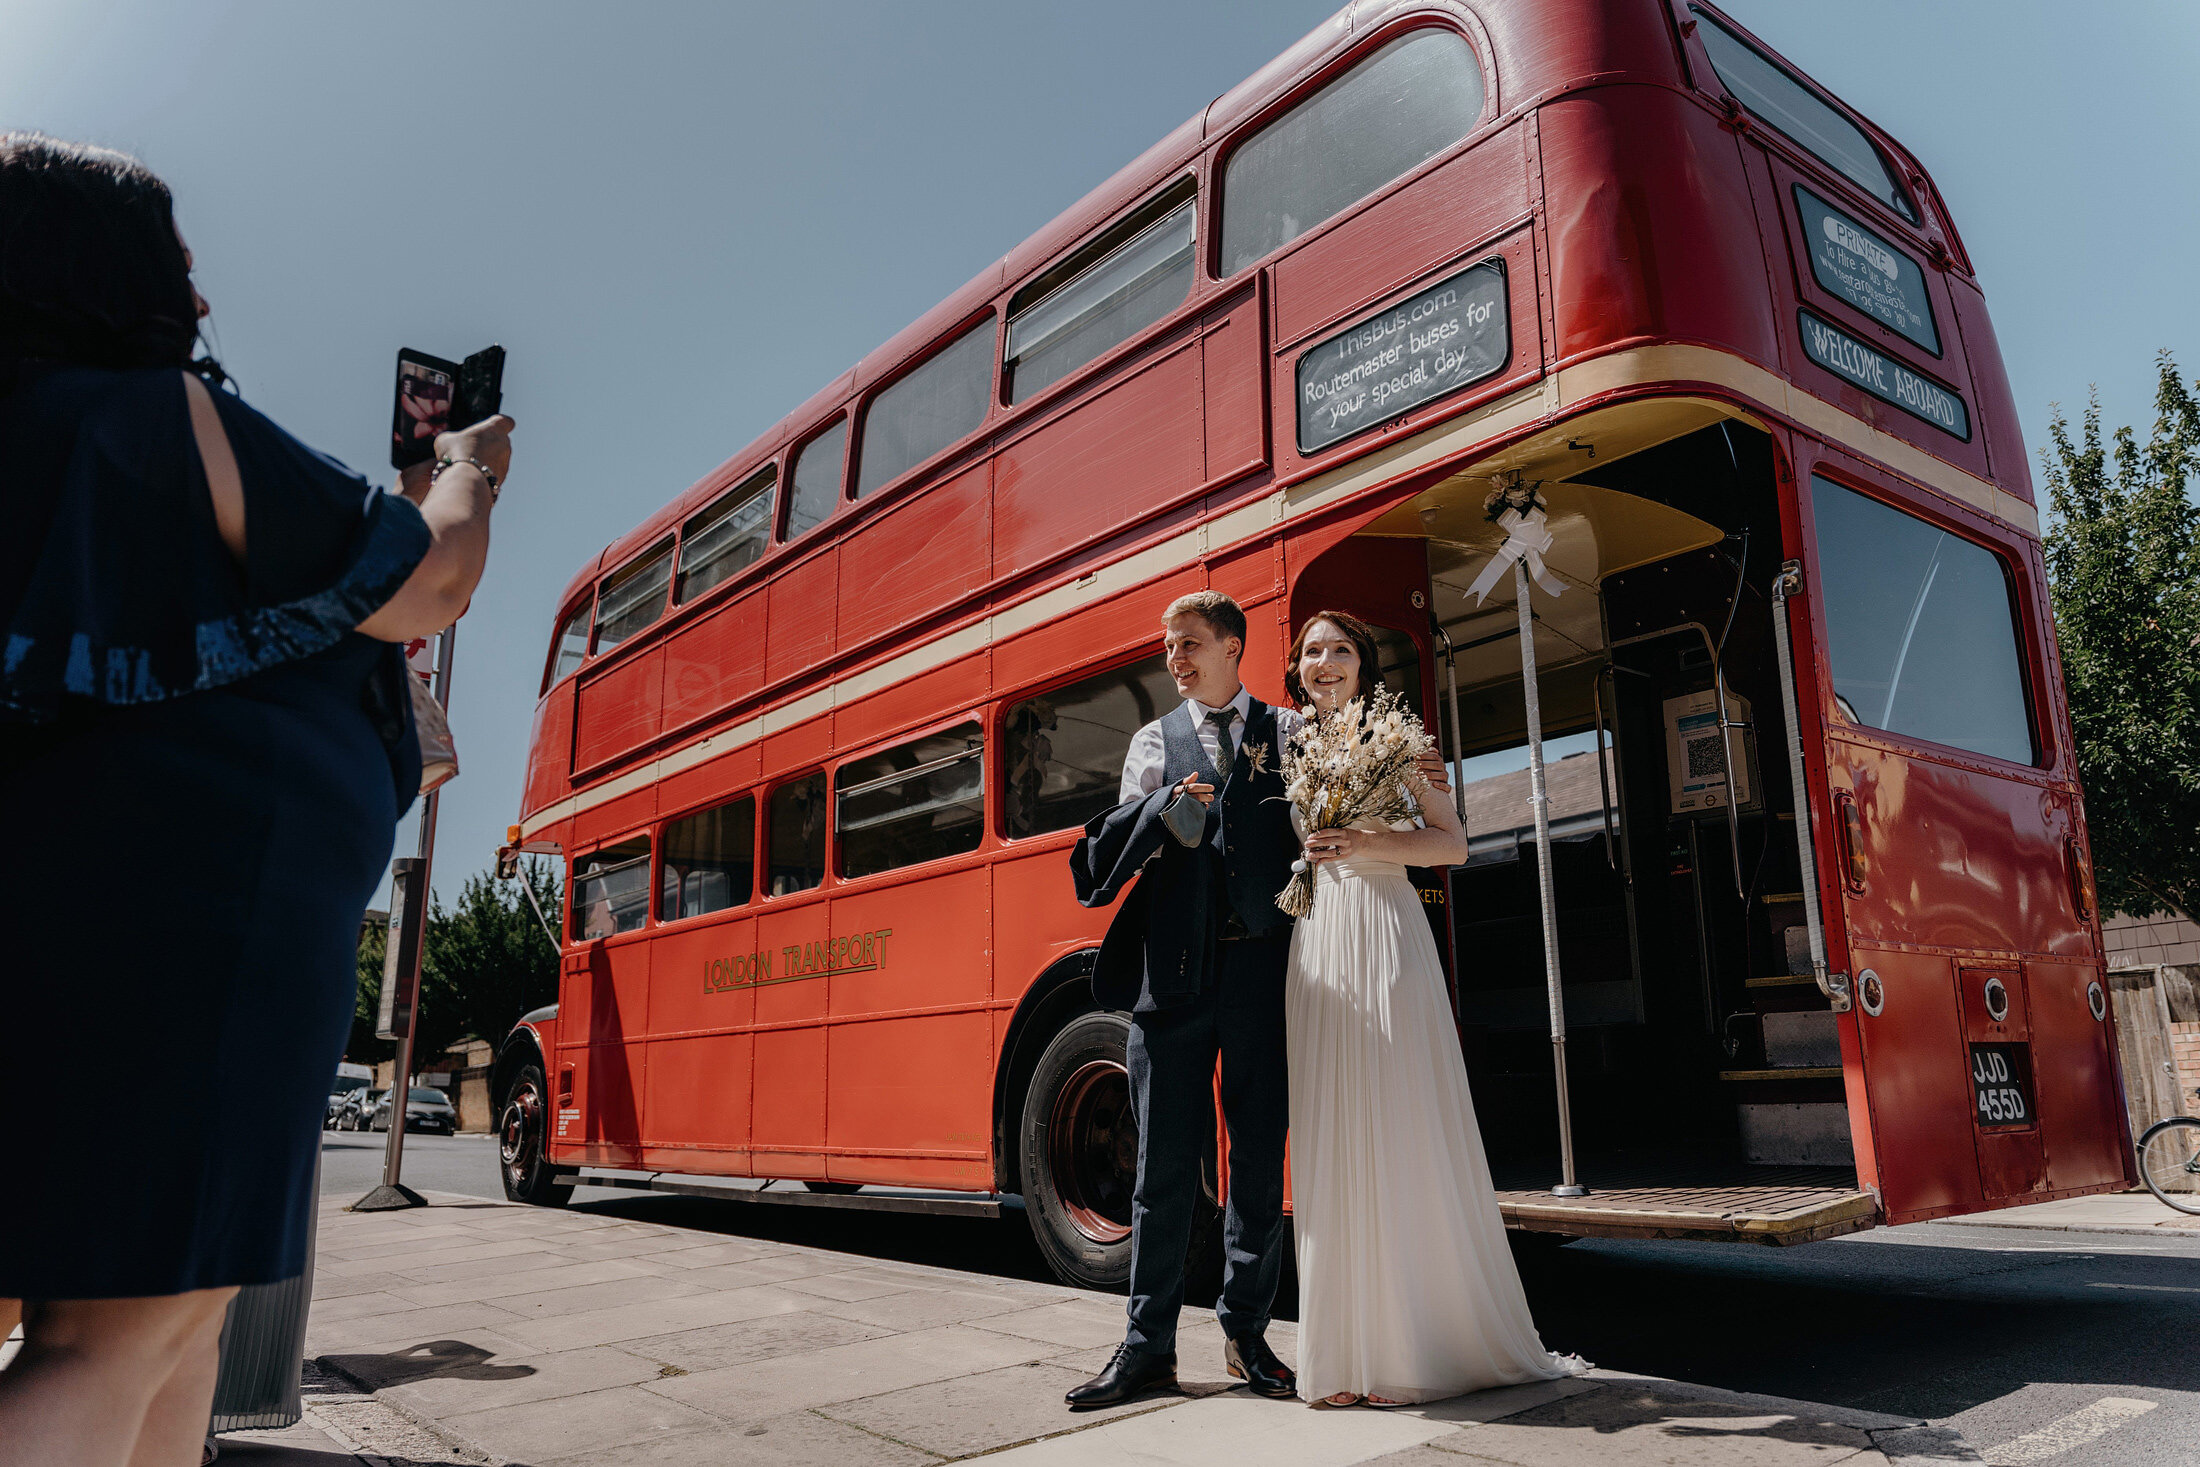 The Depot N7 wedding photography